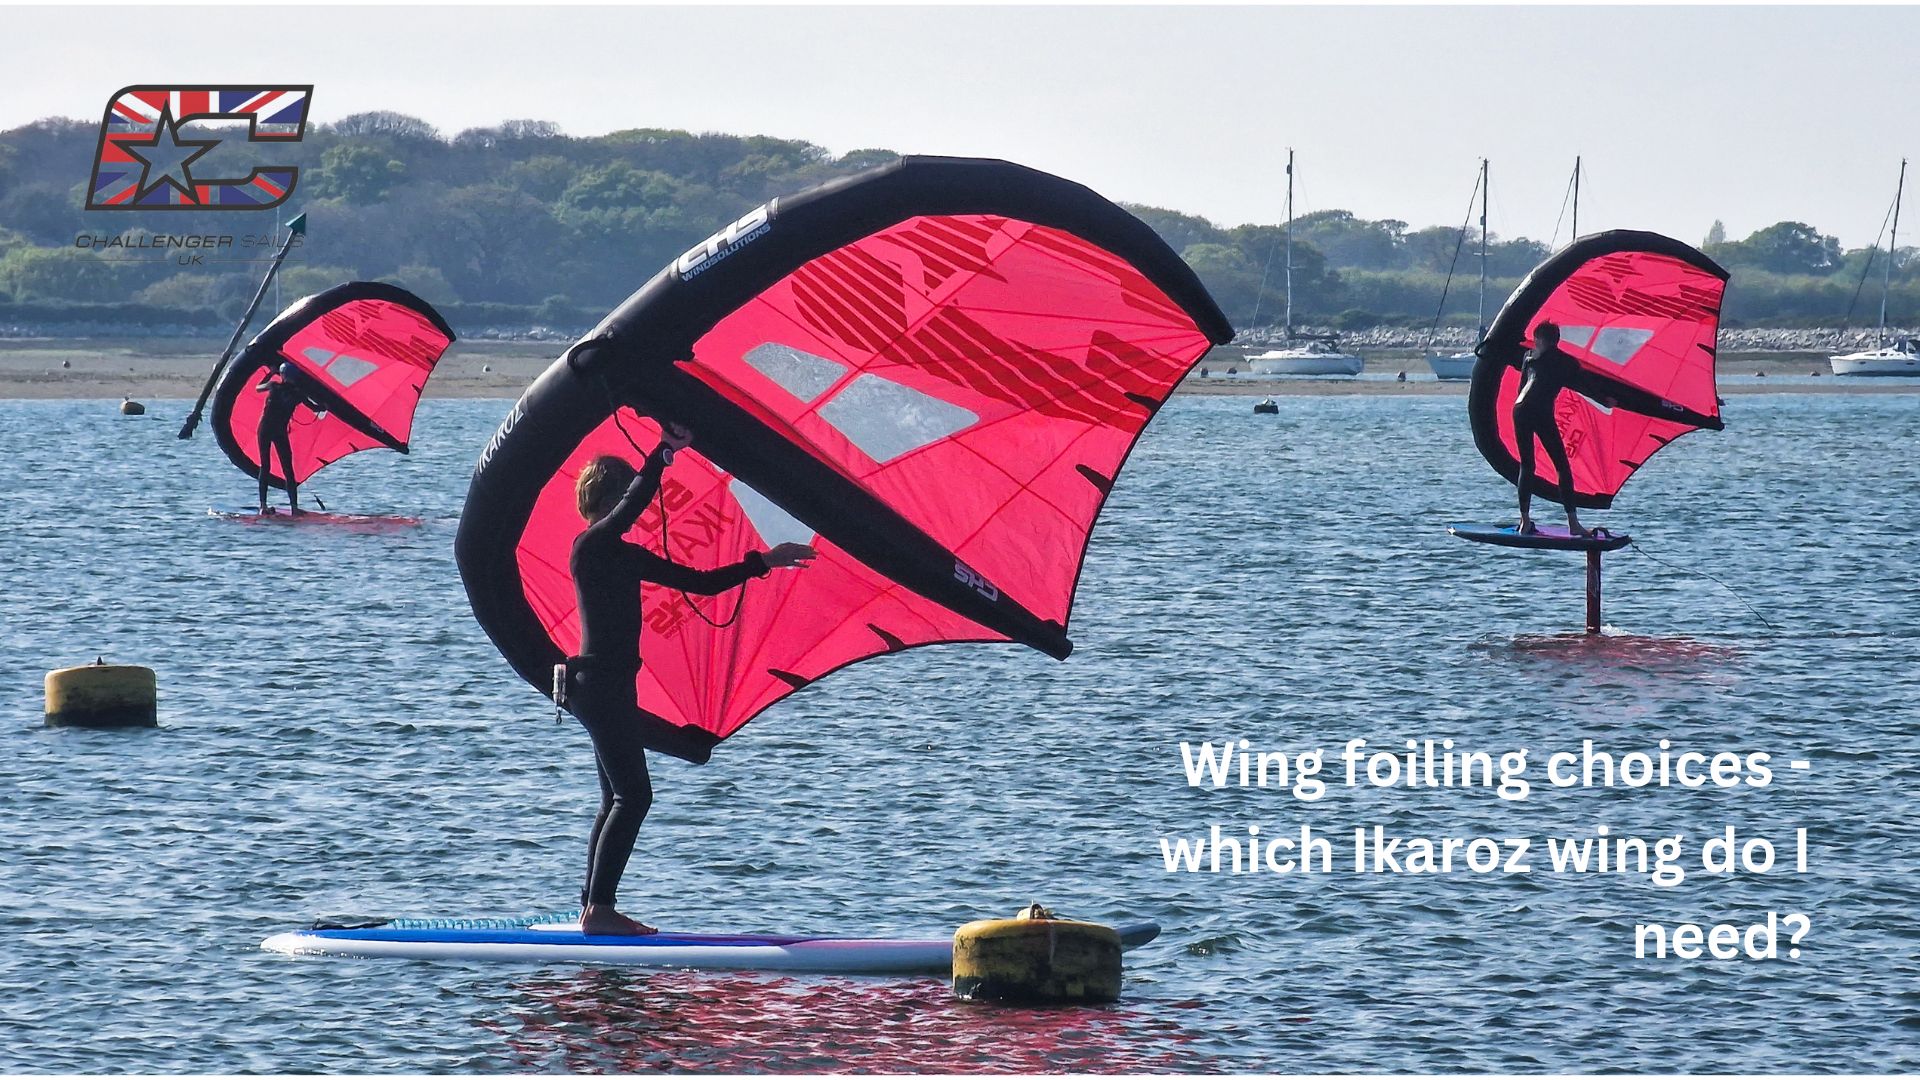 Wing foiling choices – which Ikaroz wing do I need?